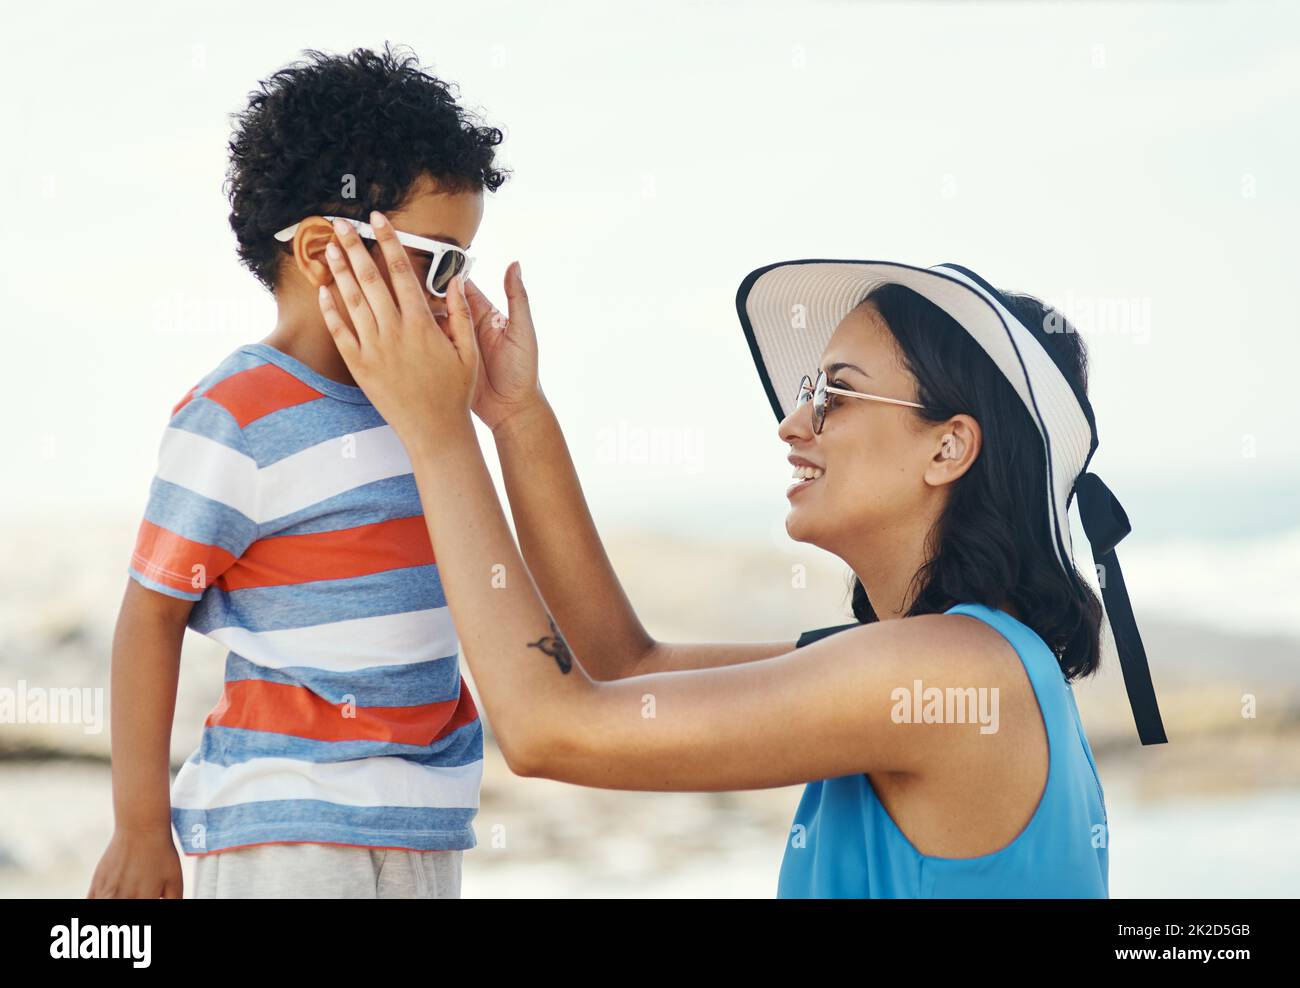 Sunglasses are really helpful for protecting your eyes. Shot of a mother applying sunscreen to her son at the beach. Stock Photo